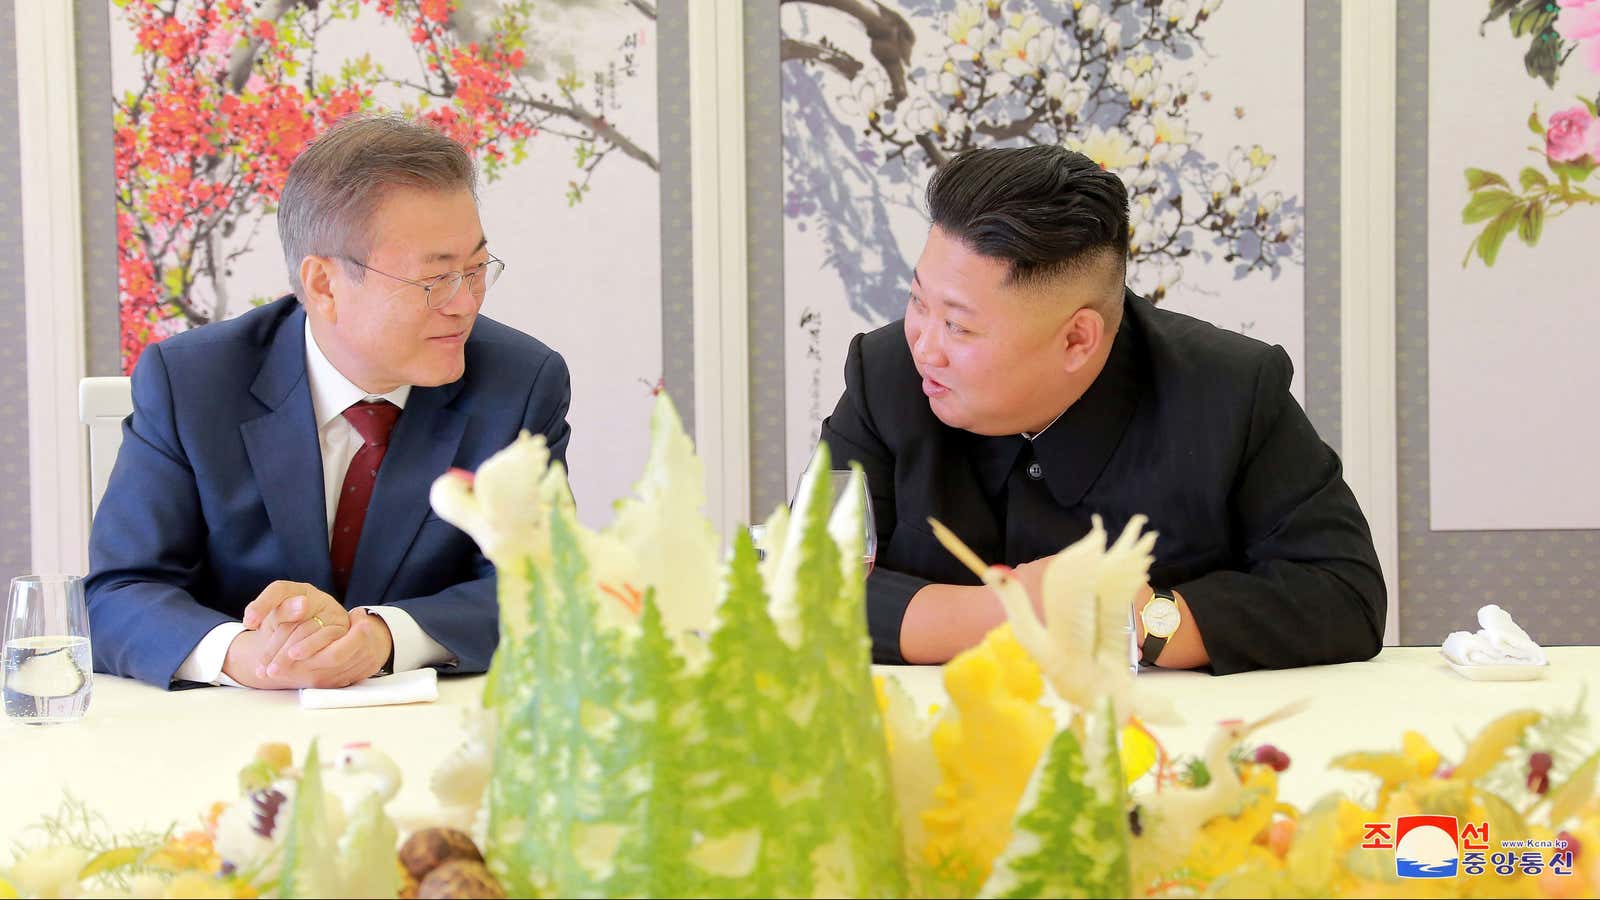 South Korean President Moon Jae-in speaks to North Korean leader Kim Jong Un during a luncheon, in this photo released by North Korea’s Korean Central…